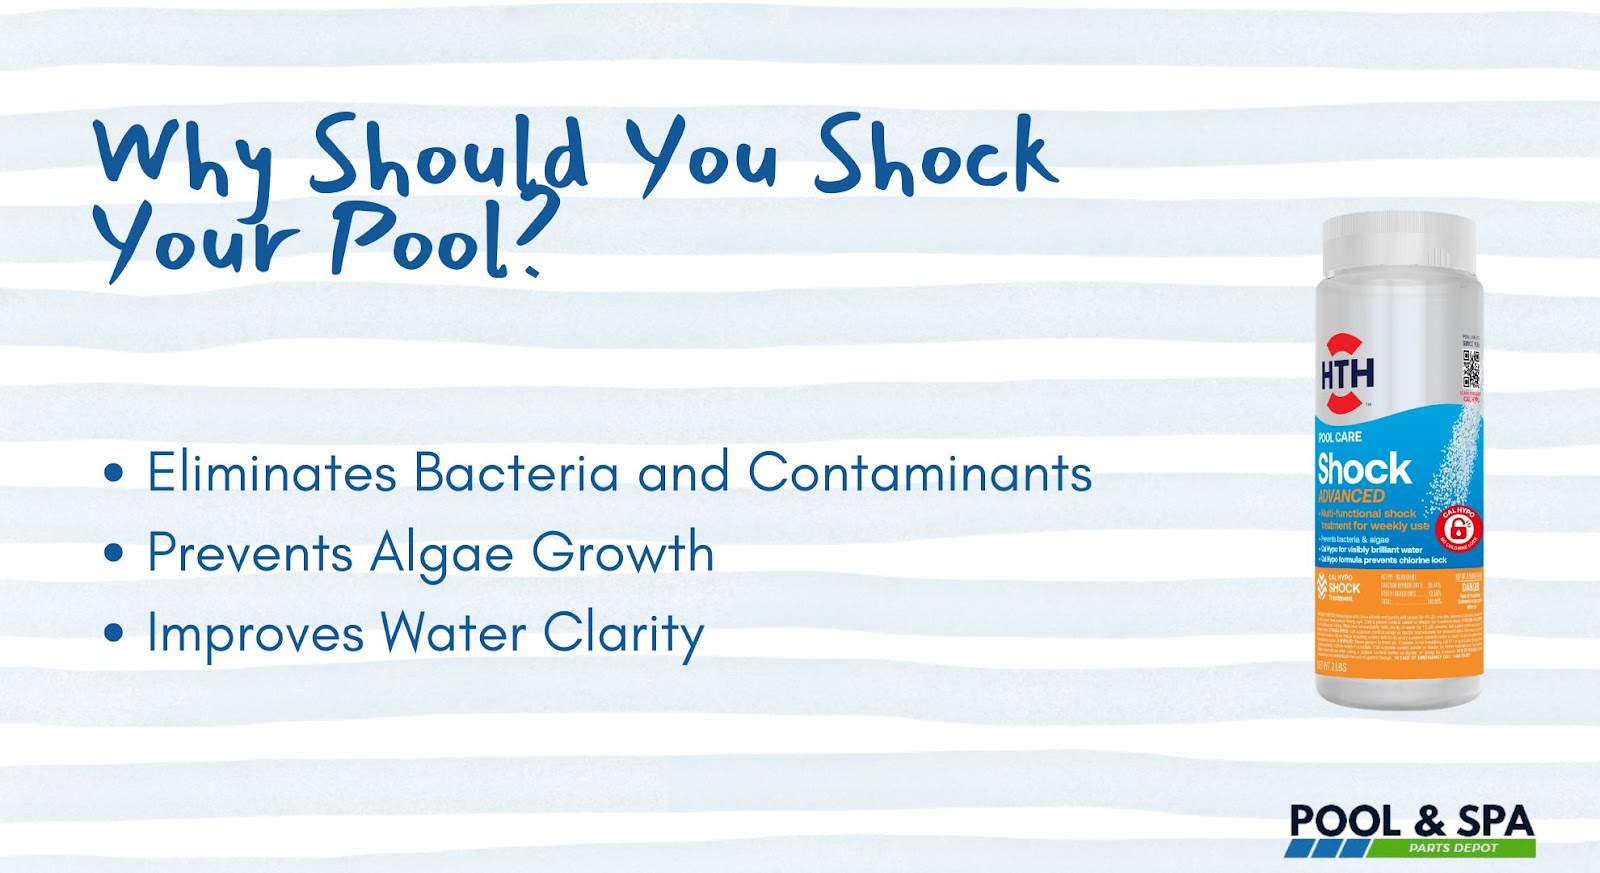 Why Should You Shock Your Pool?